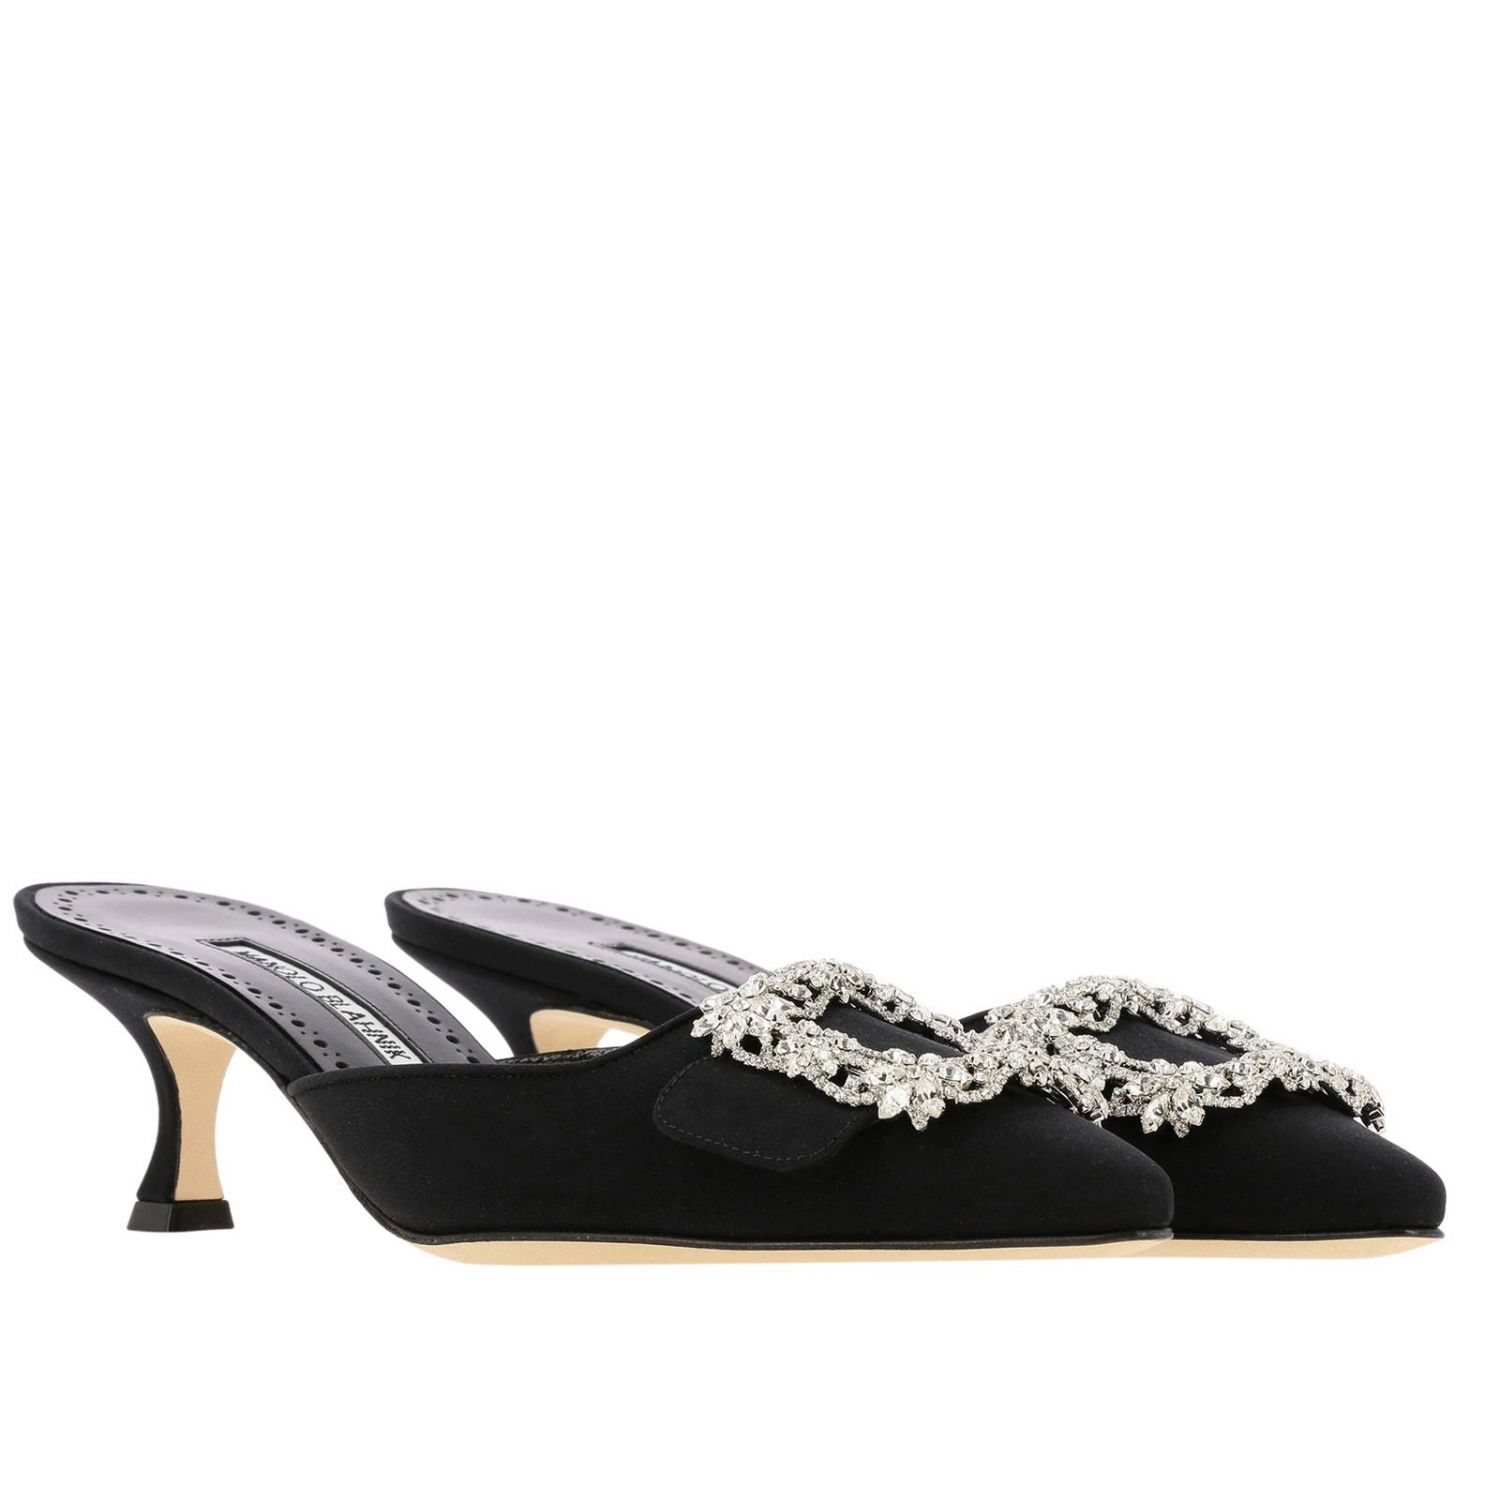 Manolo Blahnik Outlet: Maysale Mules in crepe de chine with clear ...